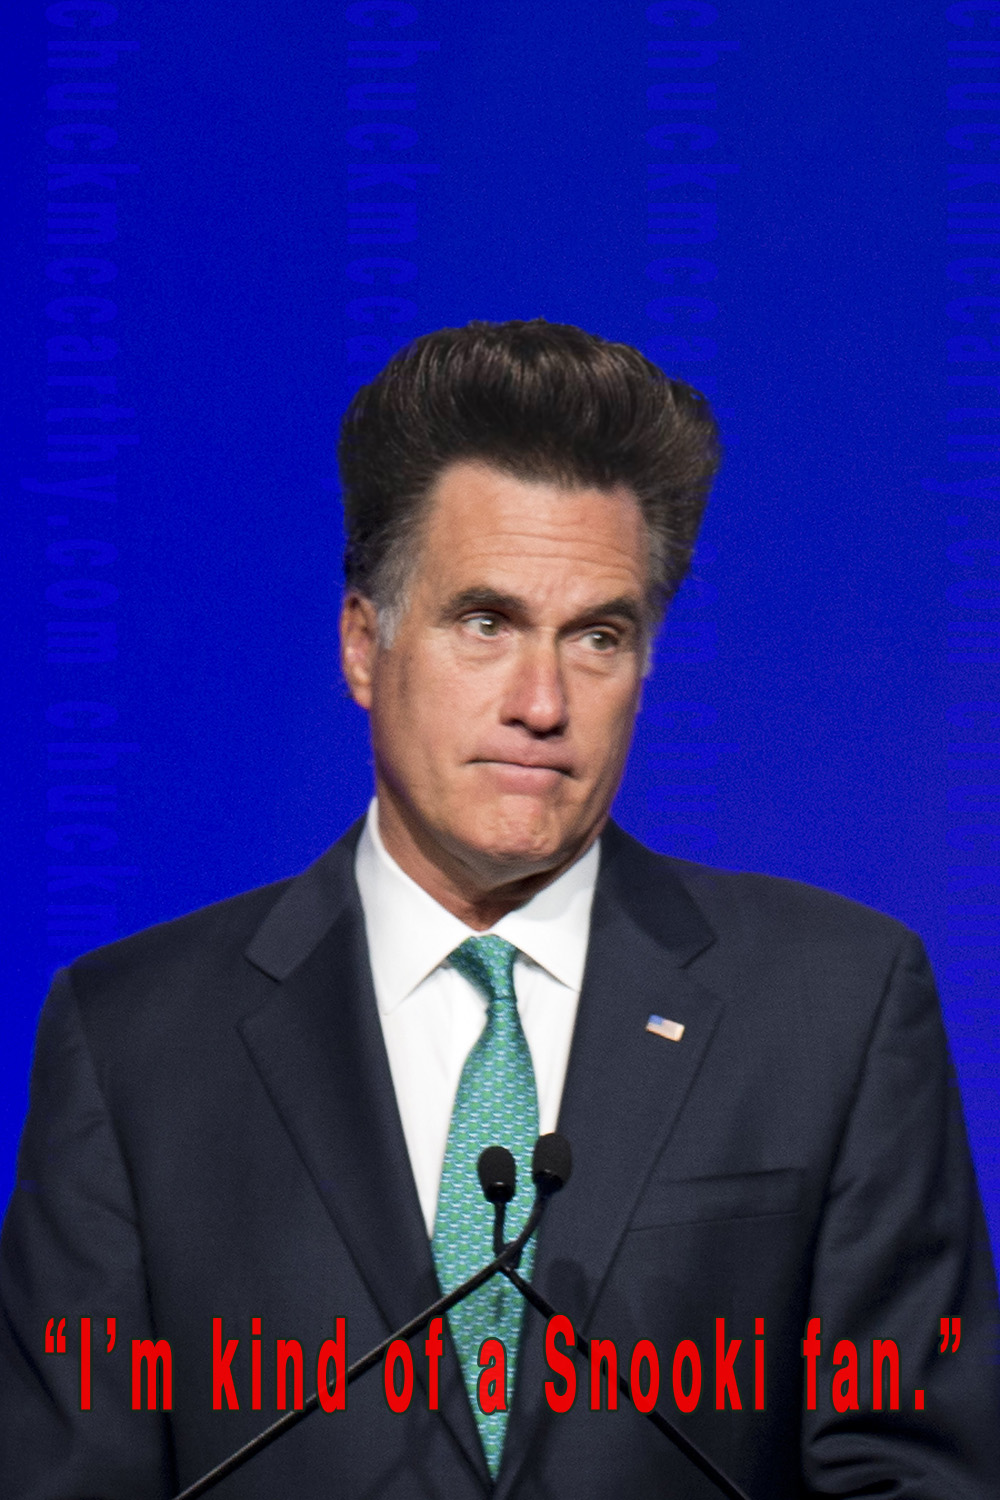 Mitt Romney as a guido from the Jersey Shore.